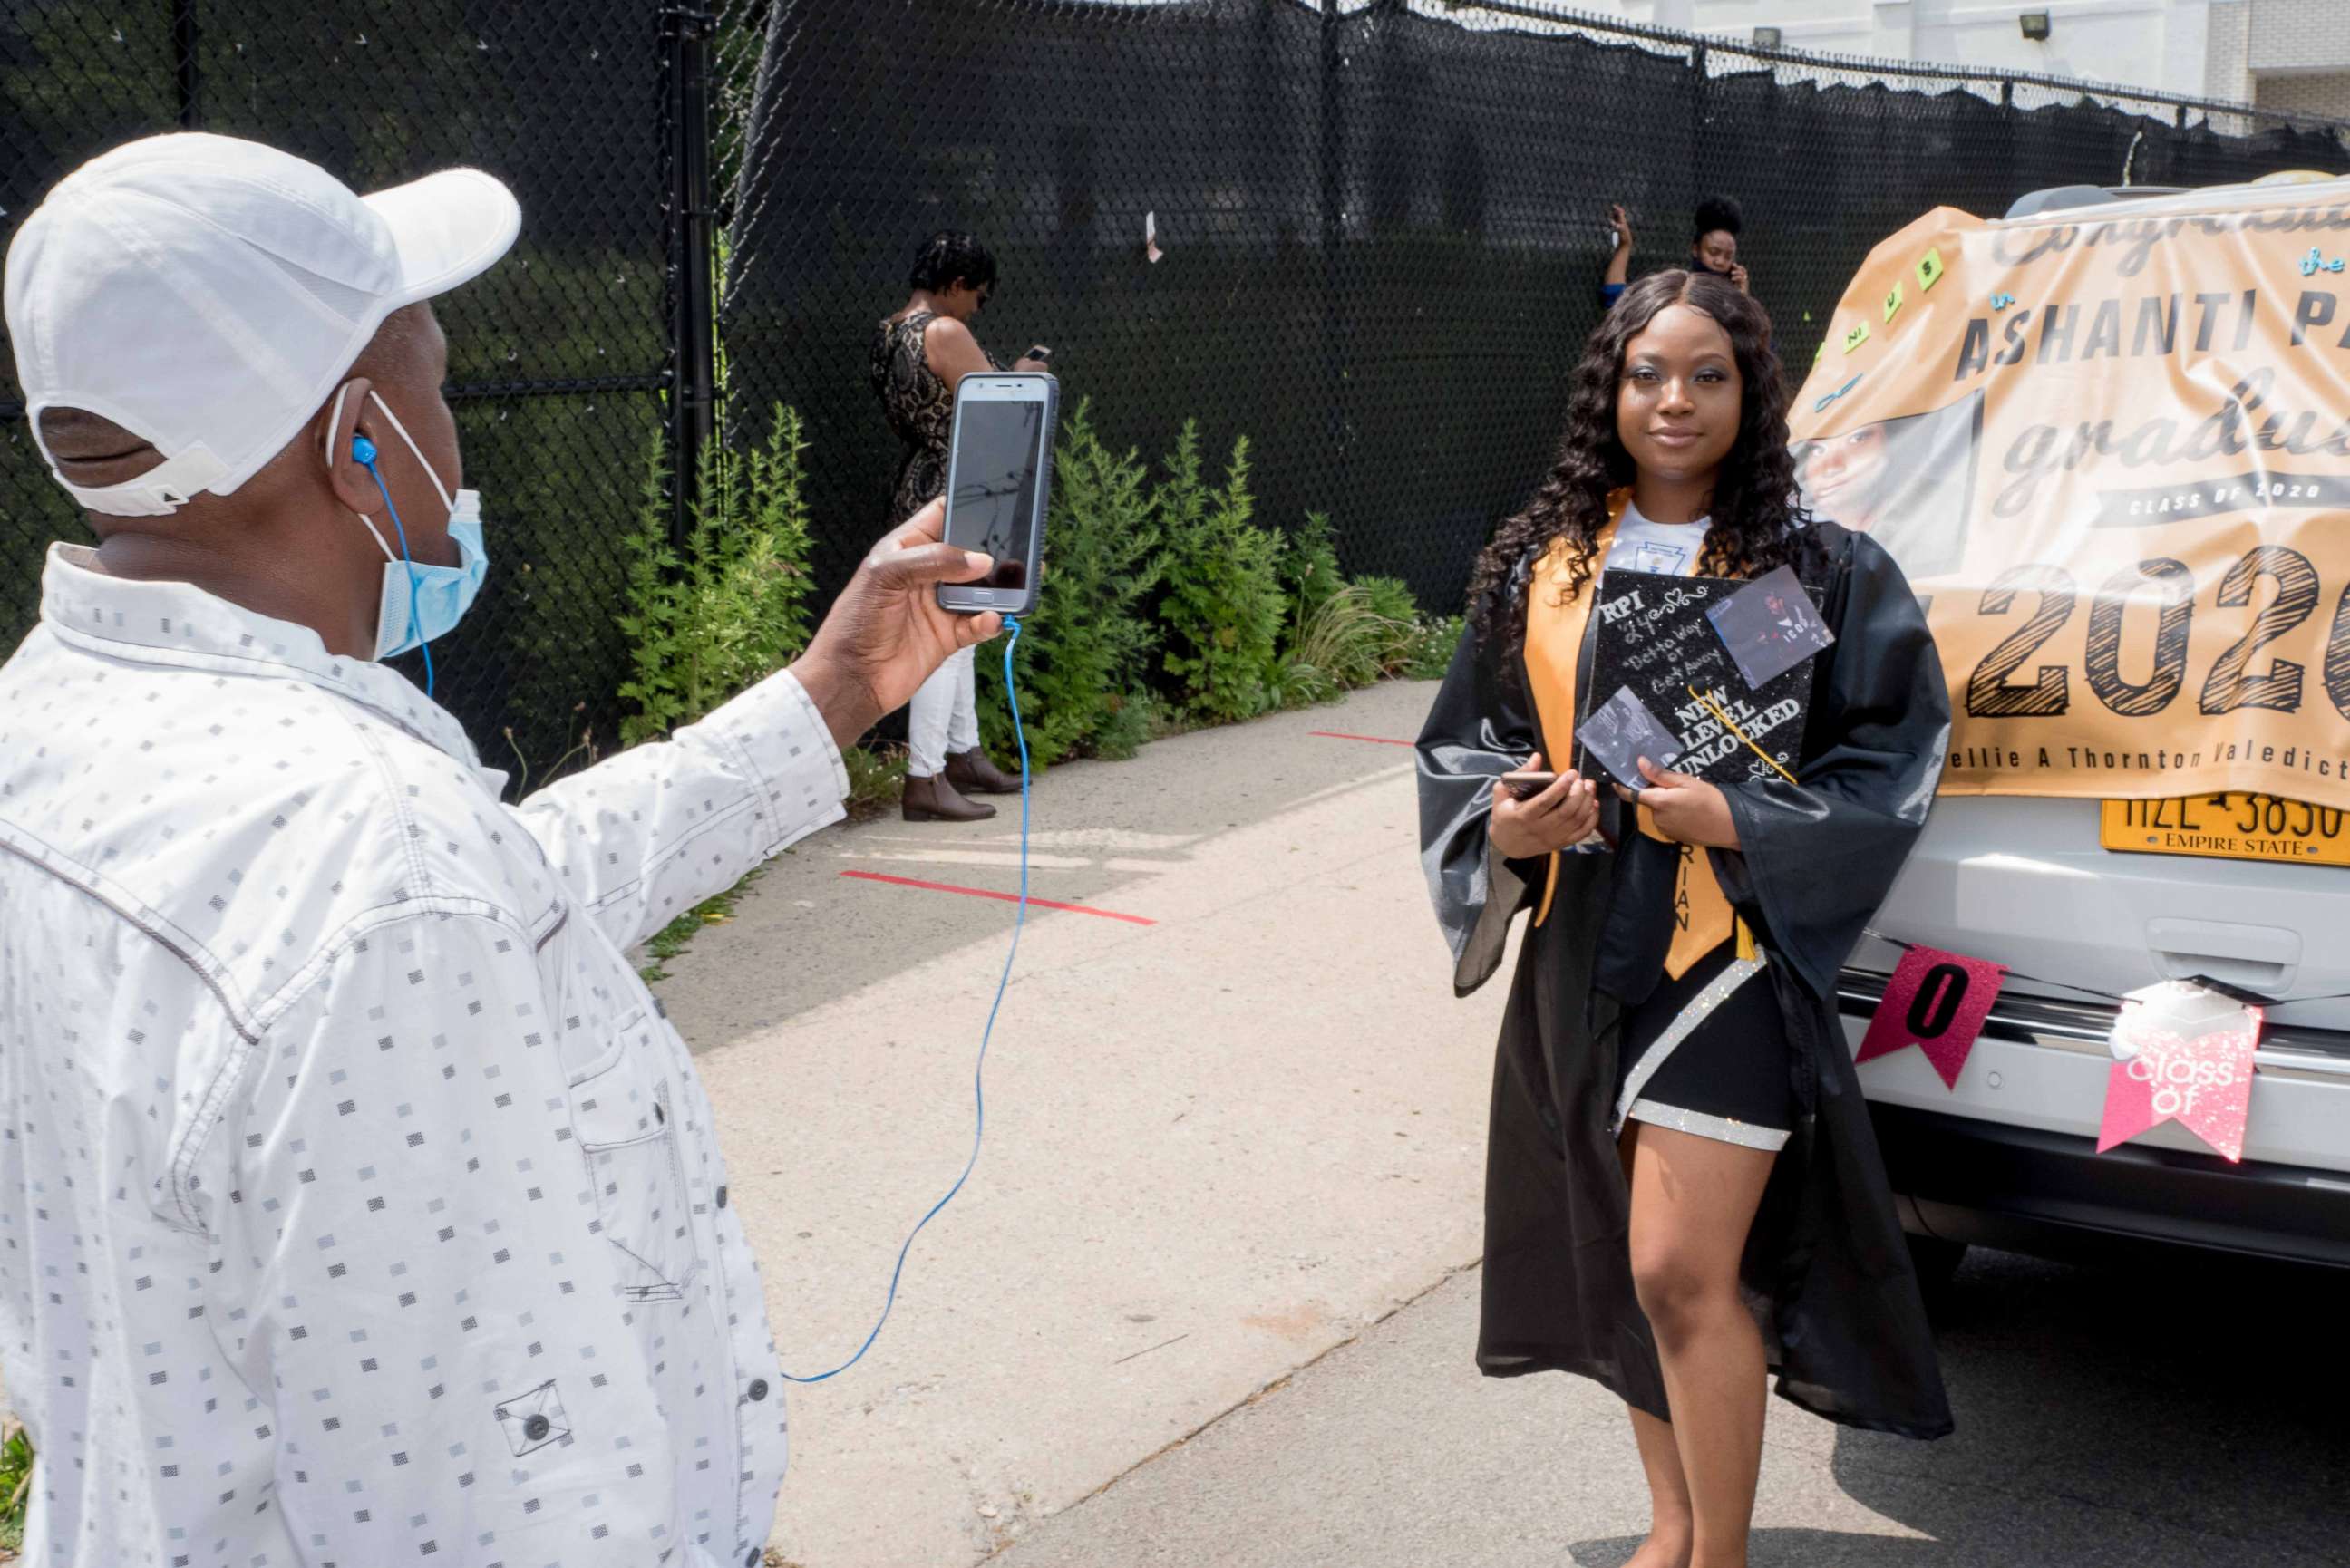 PHOTO: Ashanti Palmer, valedictorian of Nellie A. Thornton High School in Mount Vernon, New York, is headed to Rensselaer Polytechnic Institute in Troy, New York, to study biomedical engineering on the pre-med track.